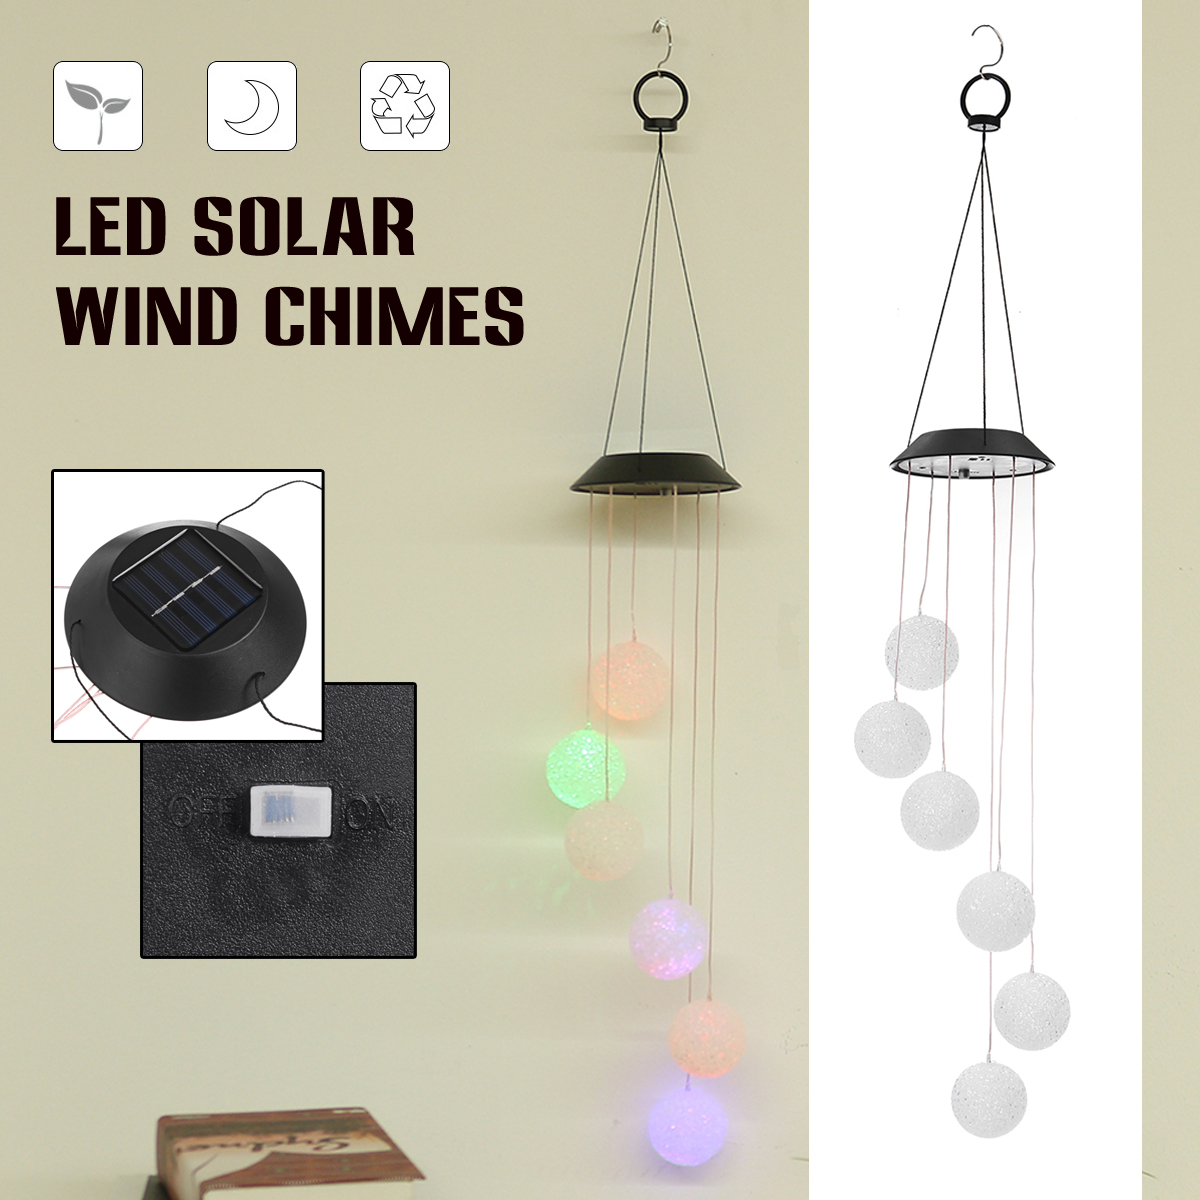 Aeolian-Hanging-Wind-Solar-LED-Lights-Chimes-Powered-String-Lawn-Garden-Lamp-1642749-1